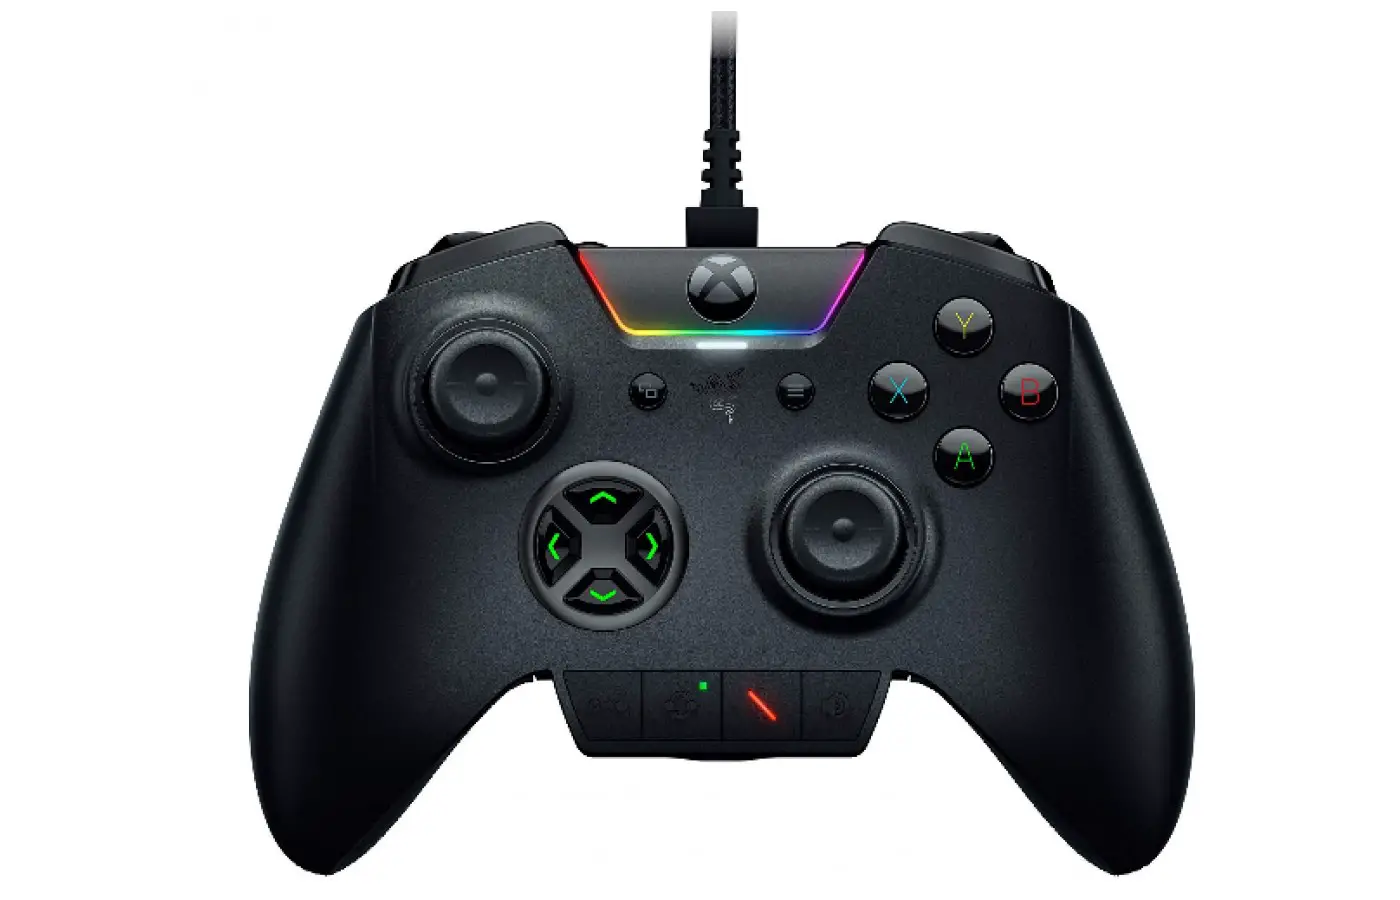 Future updates are bound to make this one of the best PX/Xbox One controllers available.